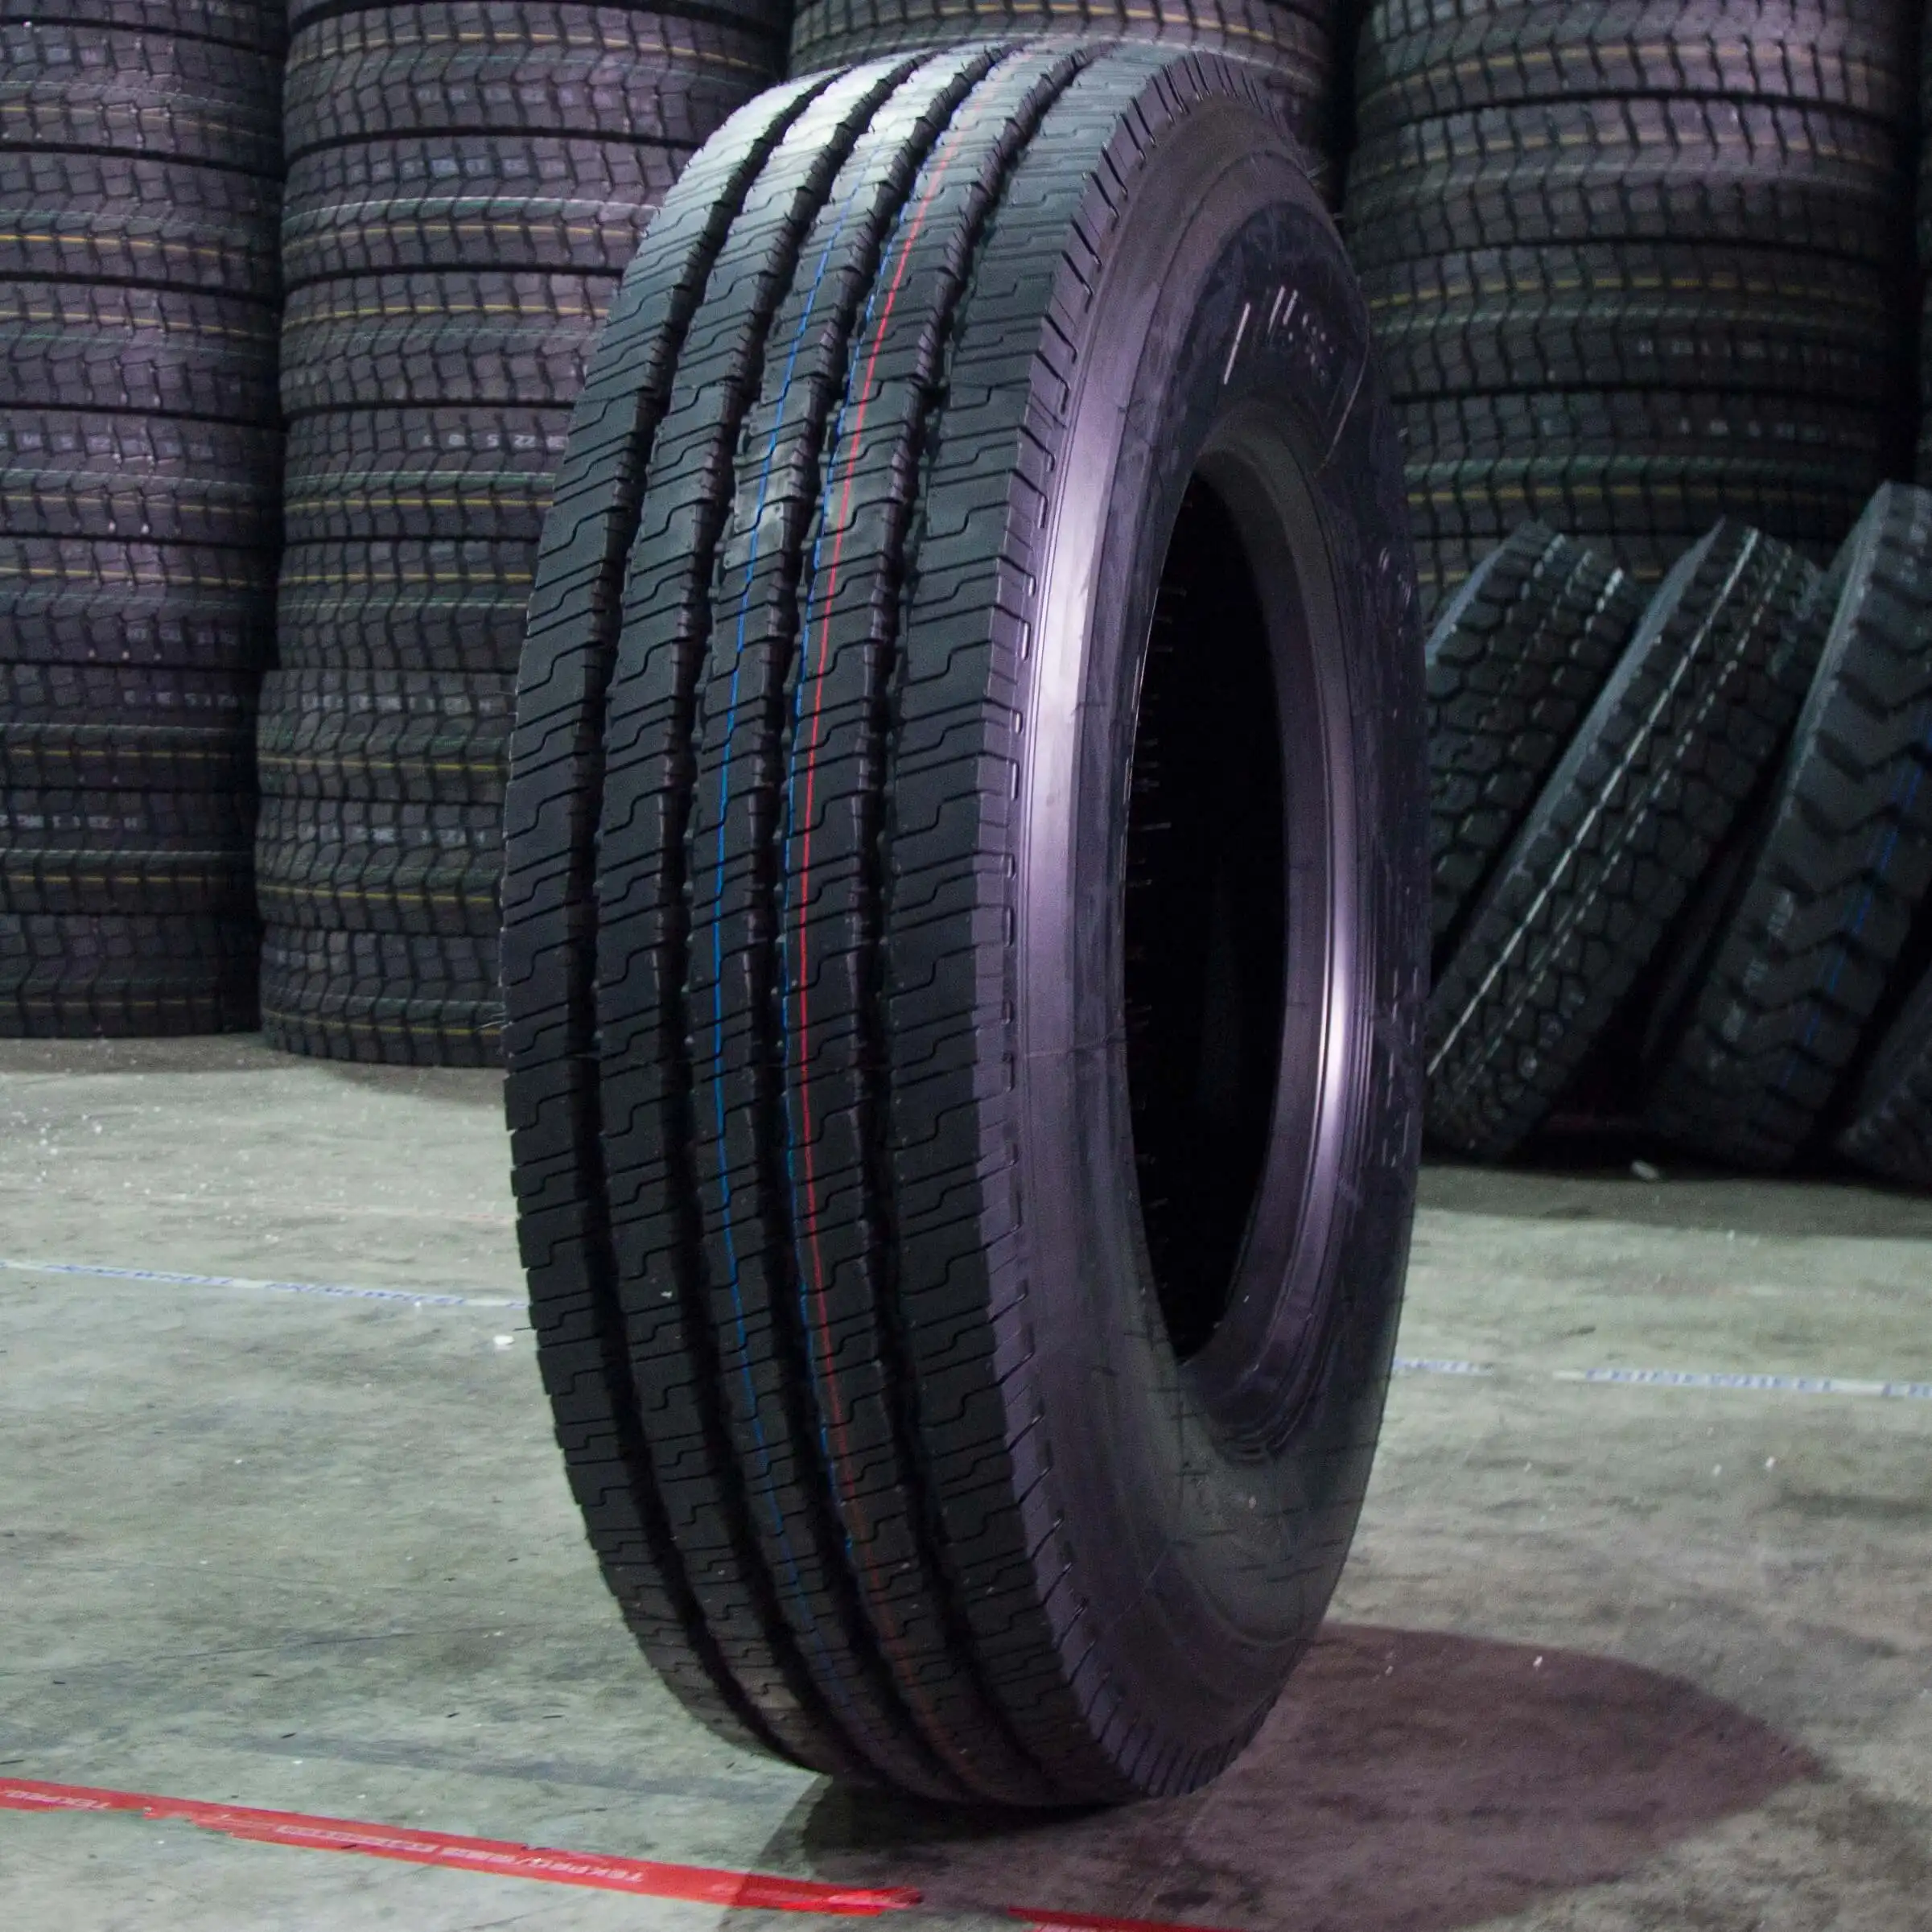 China Quality Supplier 12.00R20-20 315 80 22.5 425/85R21 Advance off road heavy duty commercial tires Tyres truck tire prices